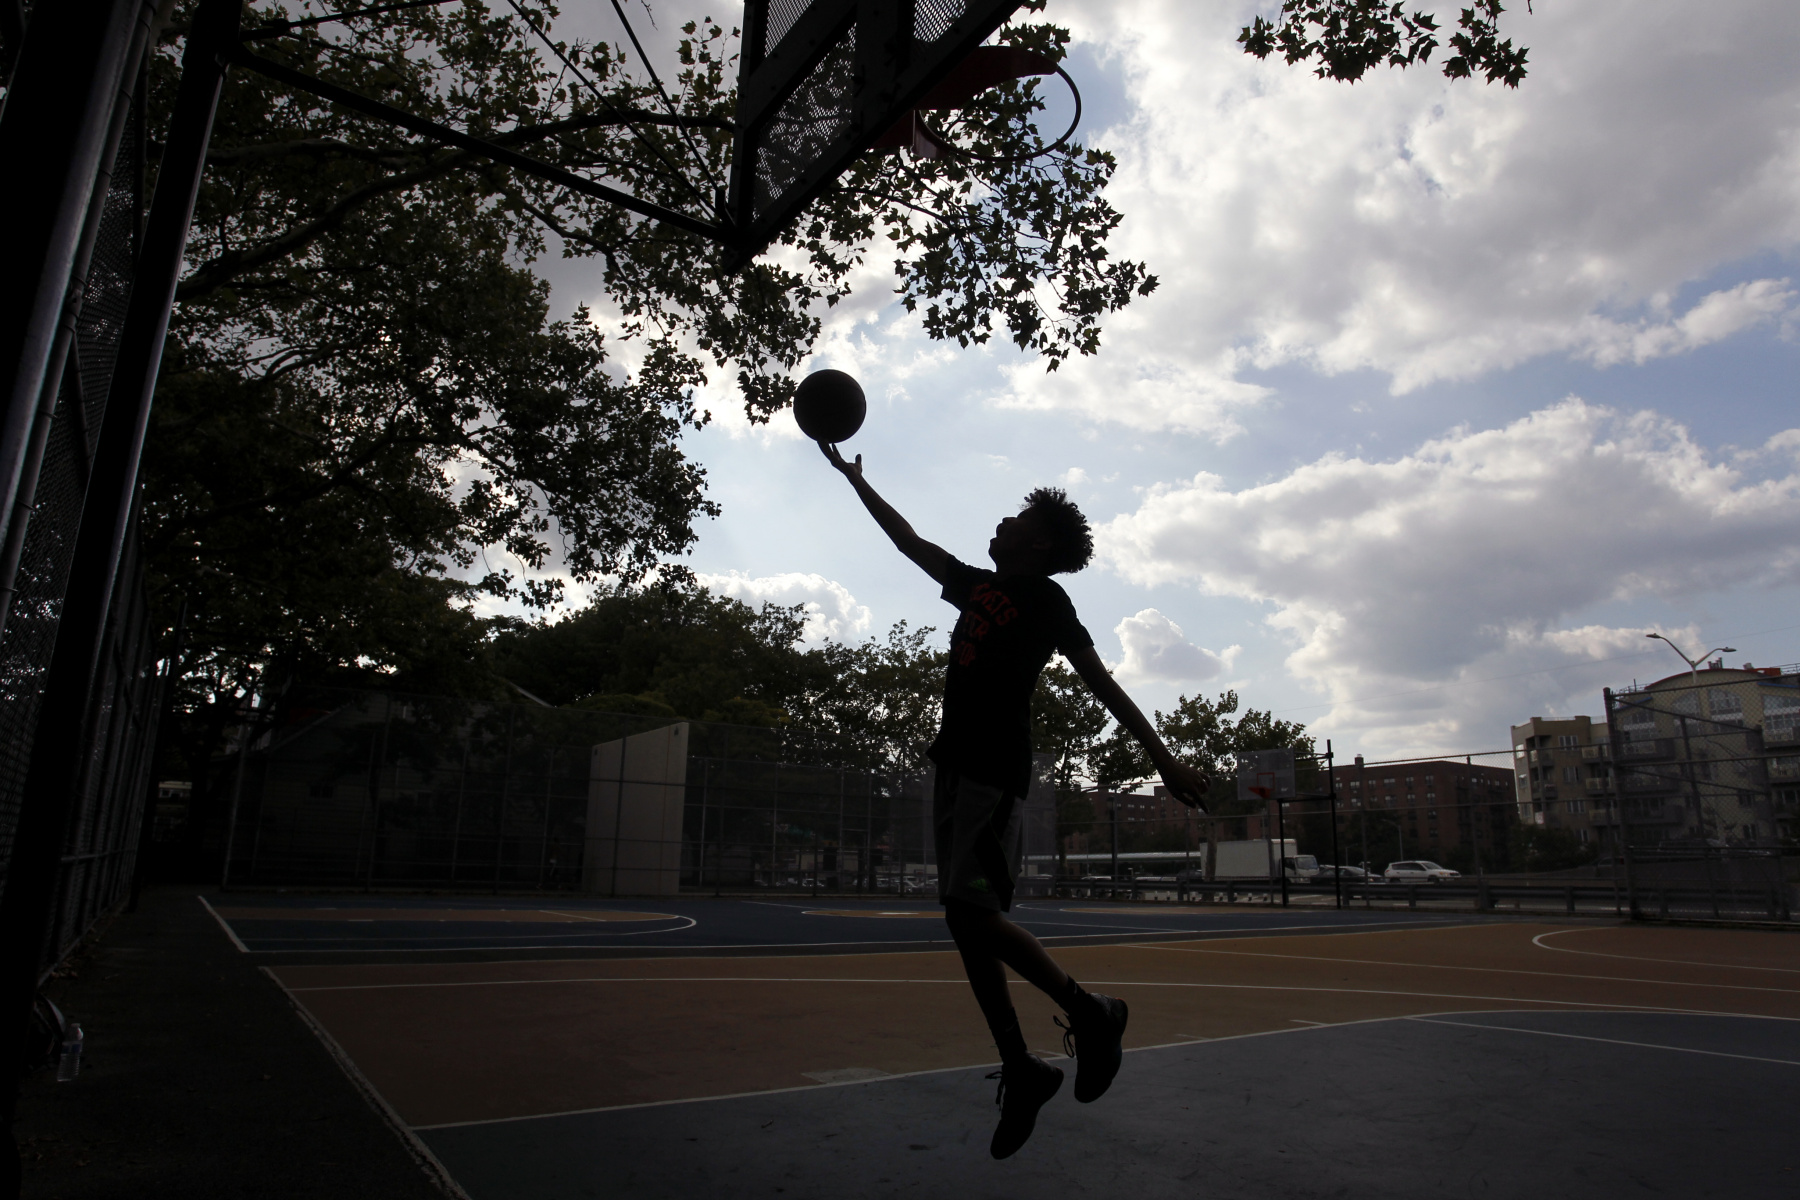 Barrier Playground, Queens : Parks and People : Photography by Adam Stoltman: Sports Photography, The Arts, Portraiture, Travel, Photojournalism and Fine Art in New York